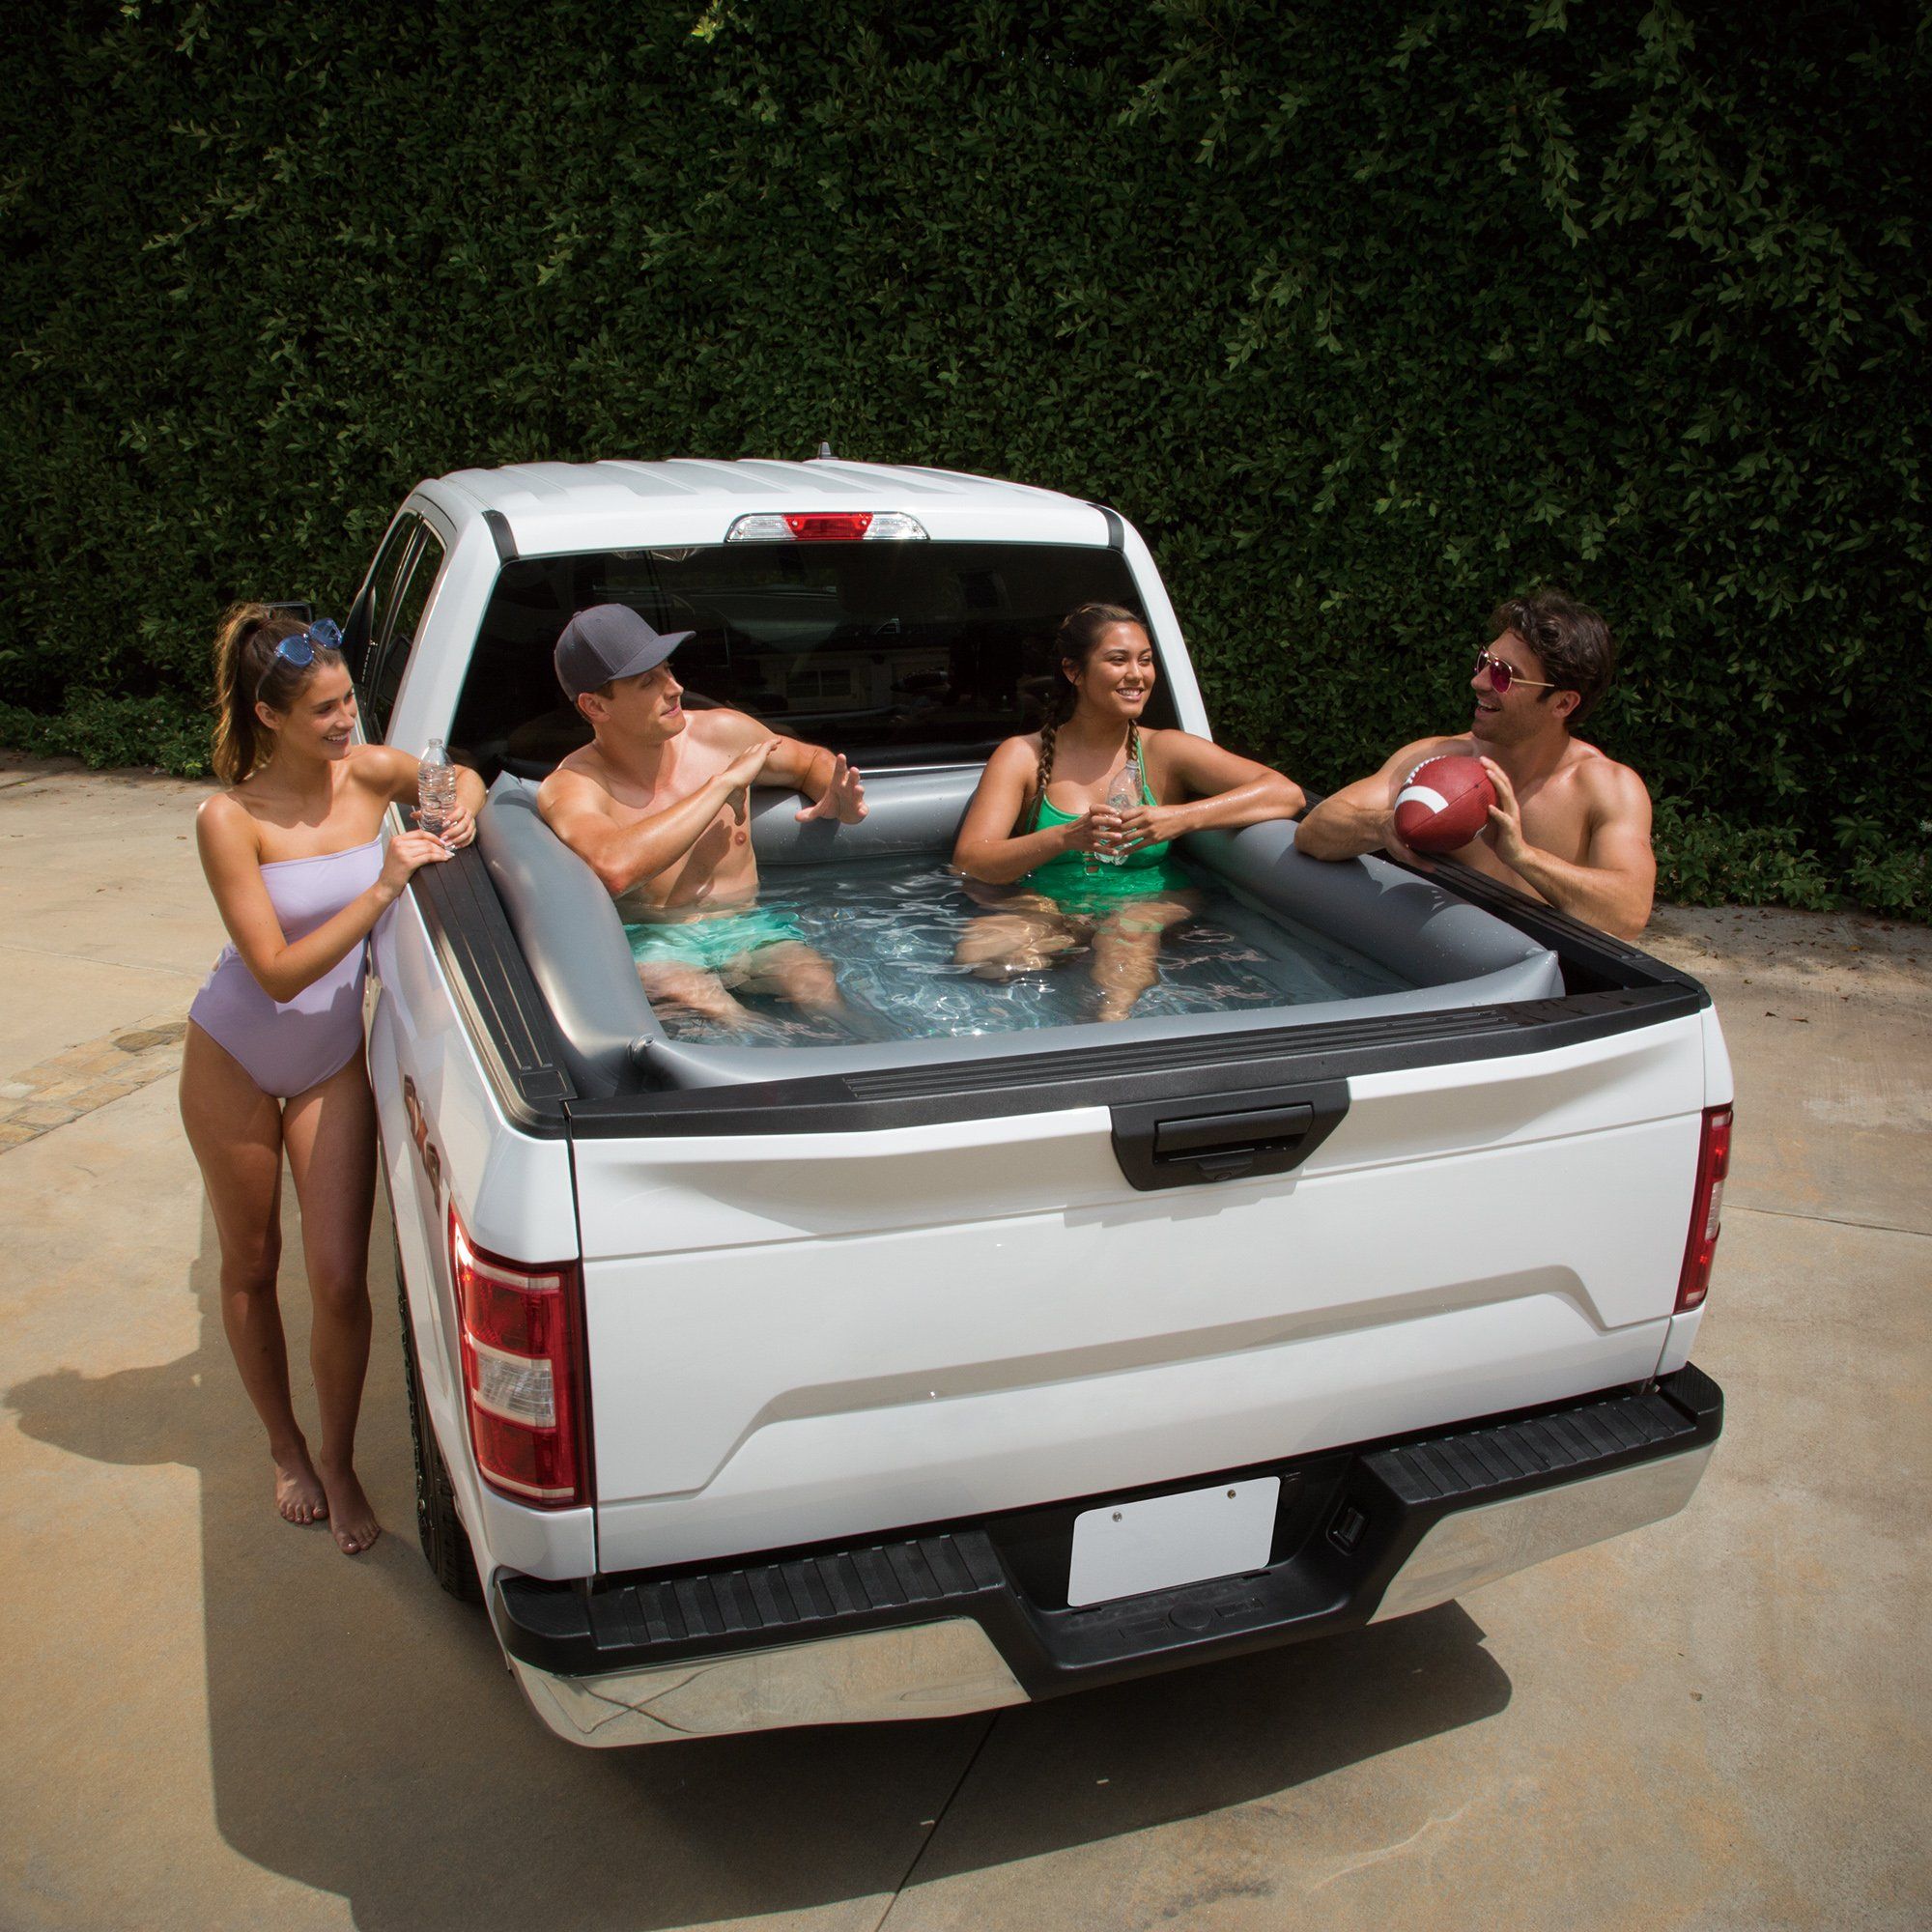 This Inflatable Pool Is Made For The Back Of Your Truck For Parties On The Go